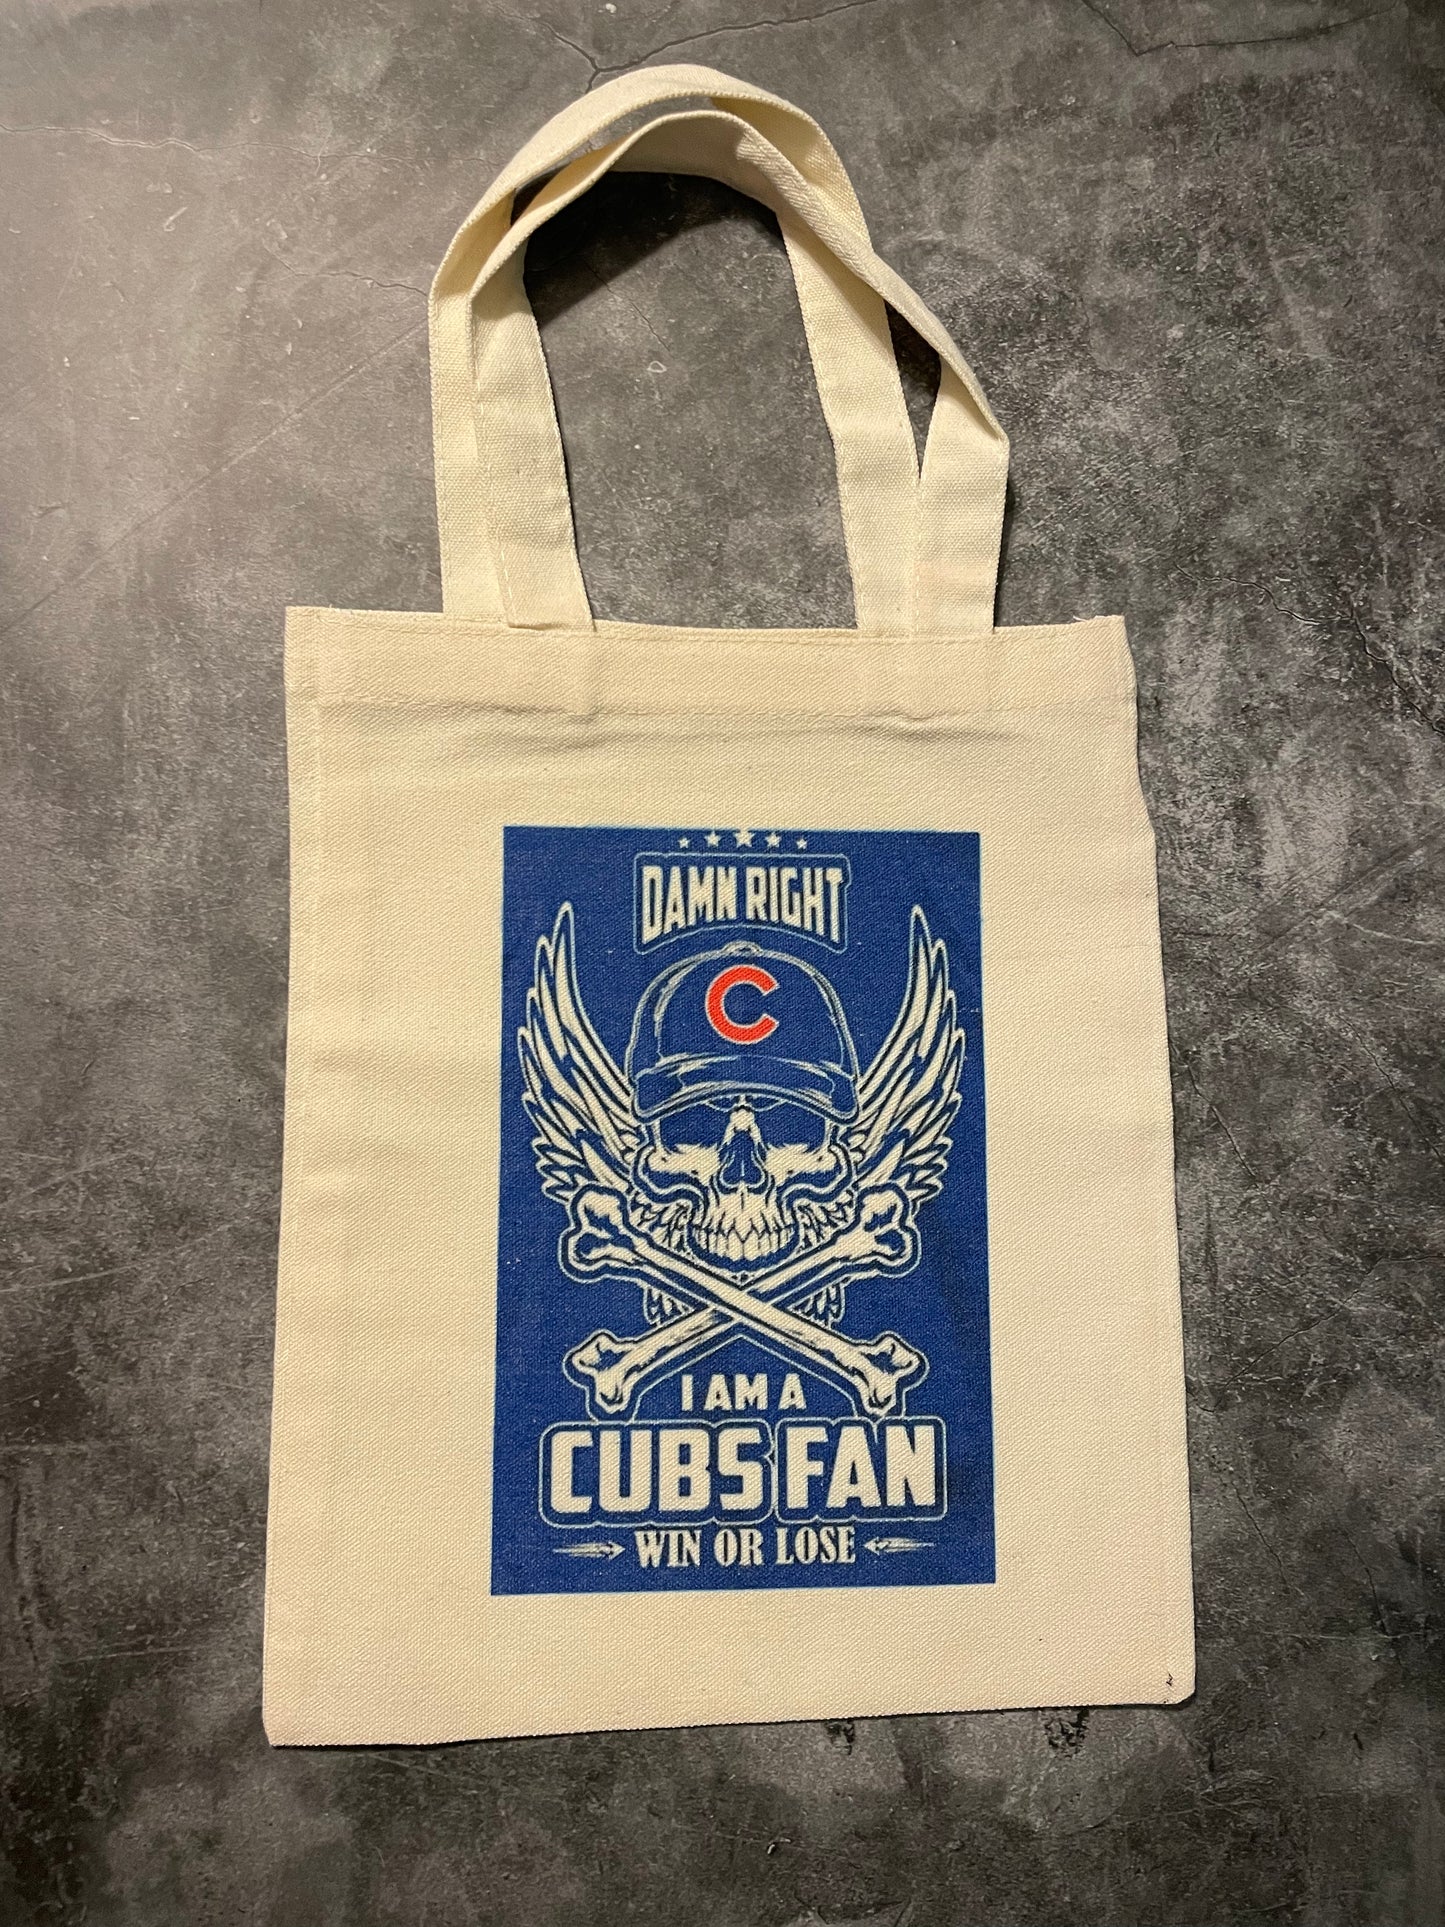 Custom Made Chicago Cubs Tote, Chicago Cubs, Customized Tote, Personalized Tote, Customized Bags, Personalized Bags, Mini Tote, Mini Bags